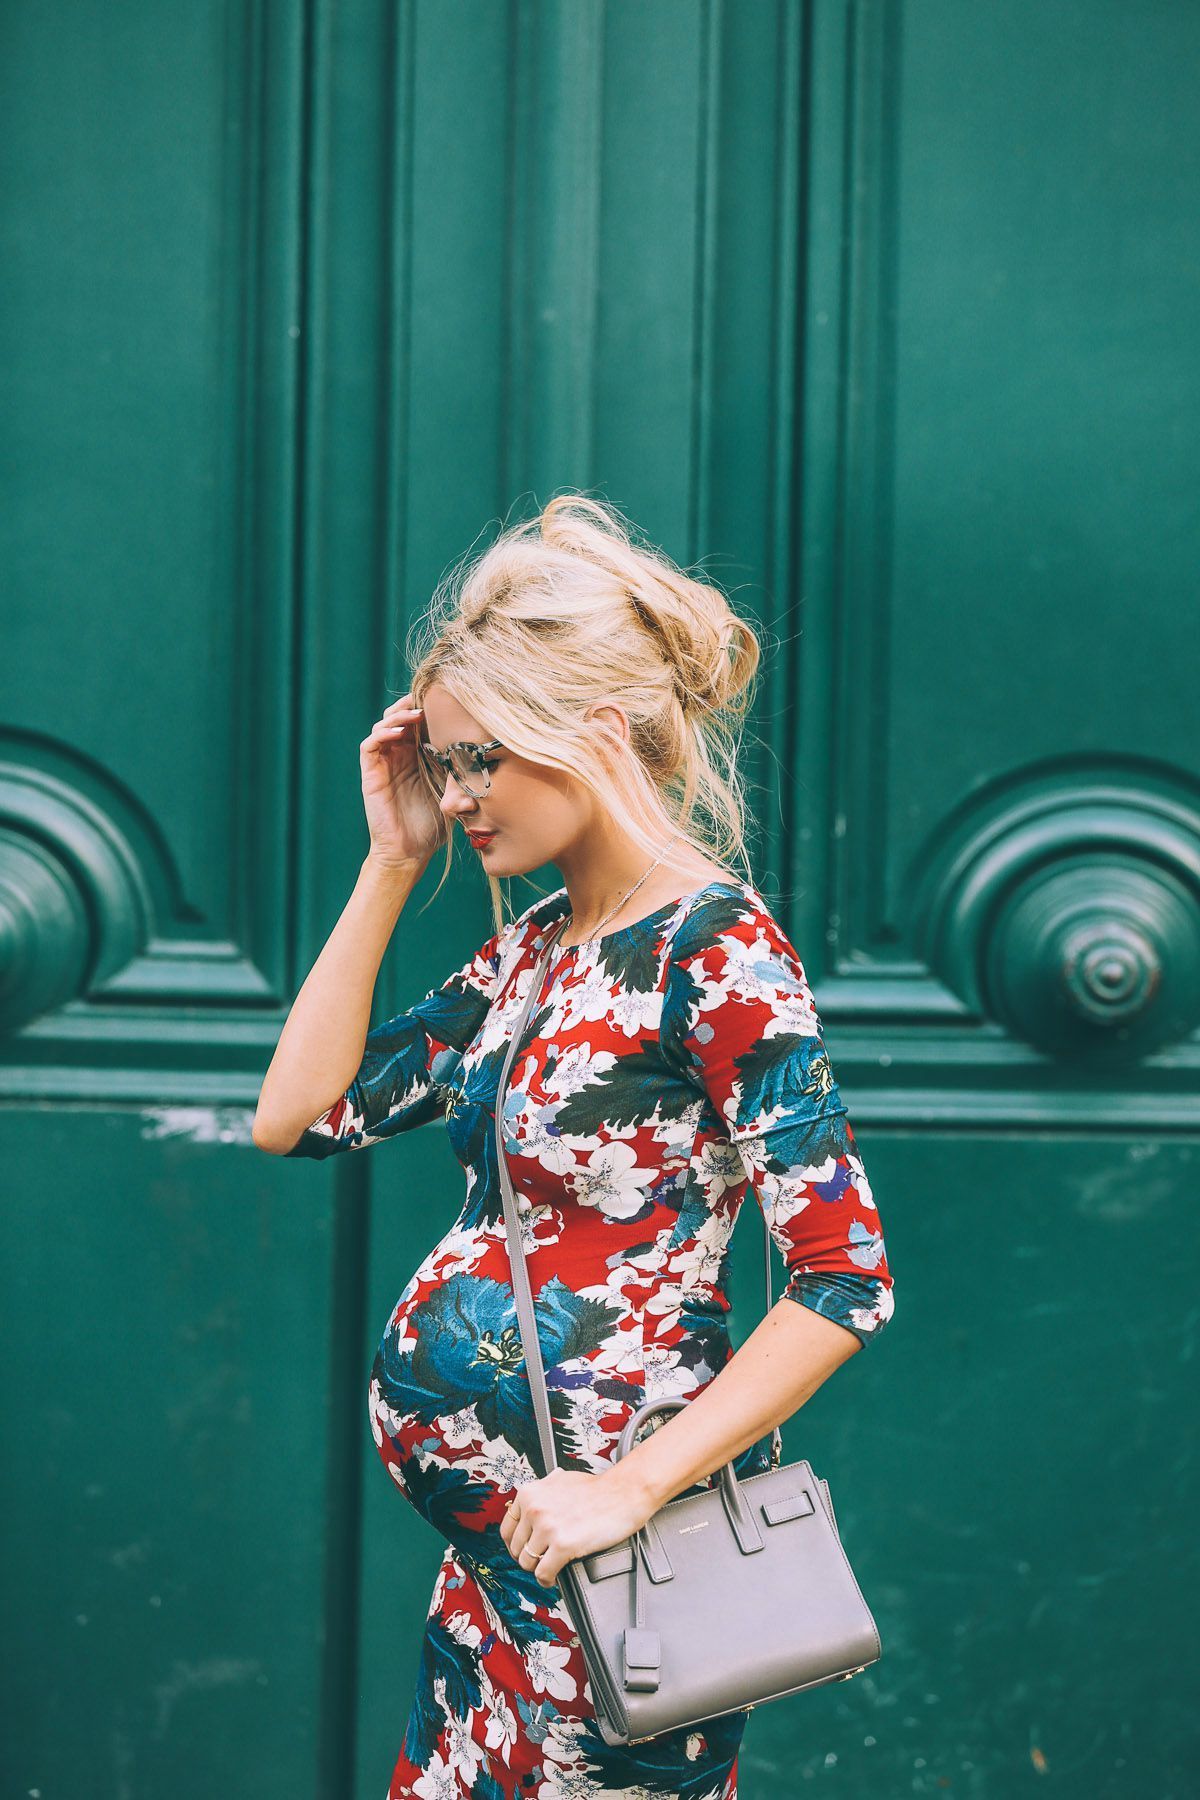 Such a cute Maternity outfit by Barefoot Blonde in Paris. Loving the floral pattern of this dress